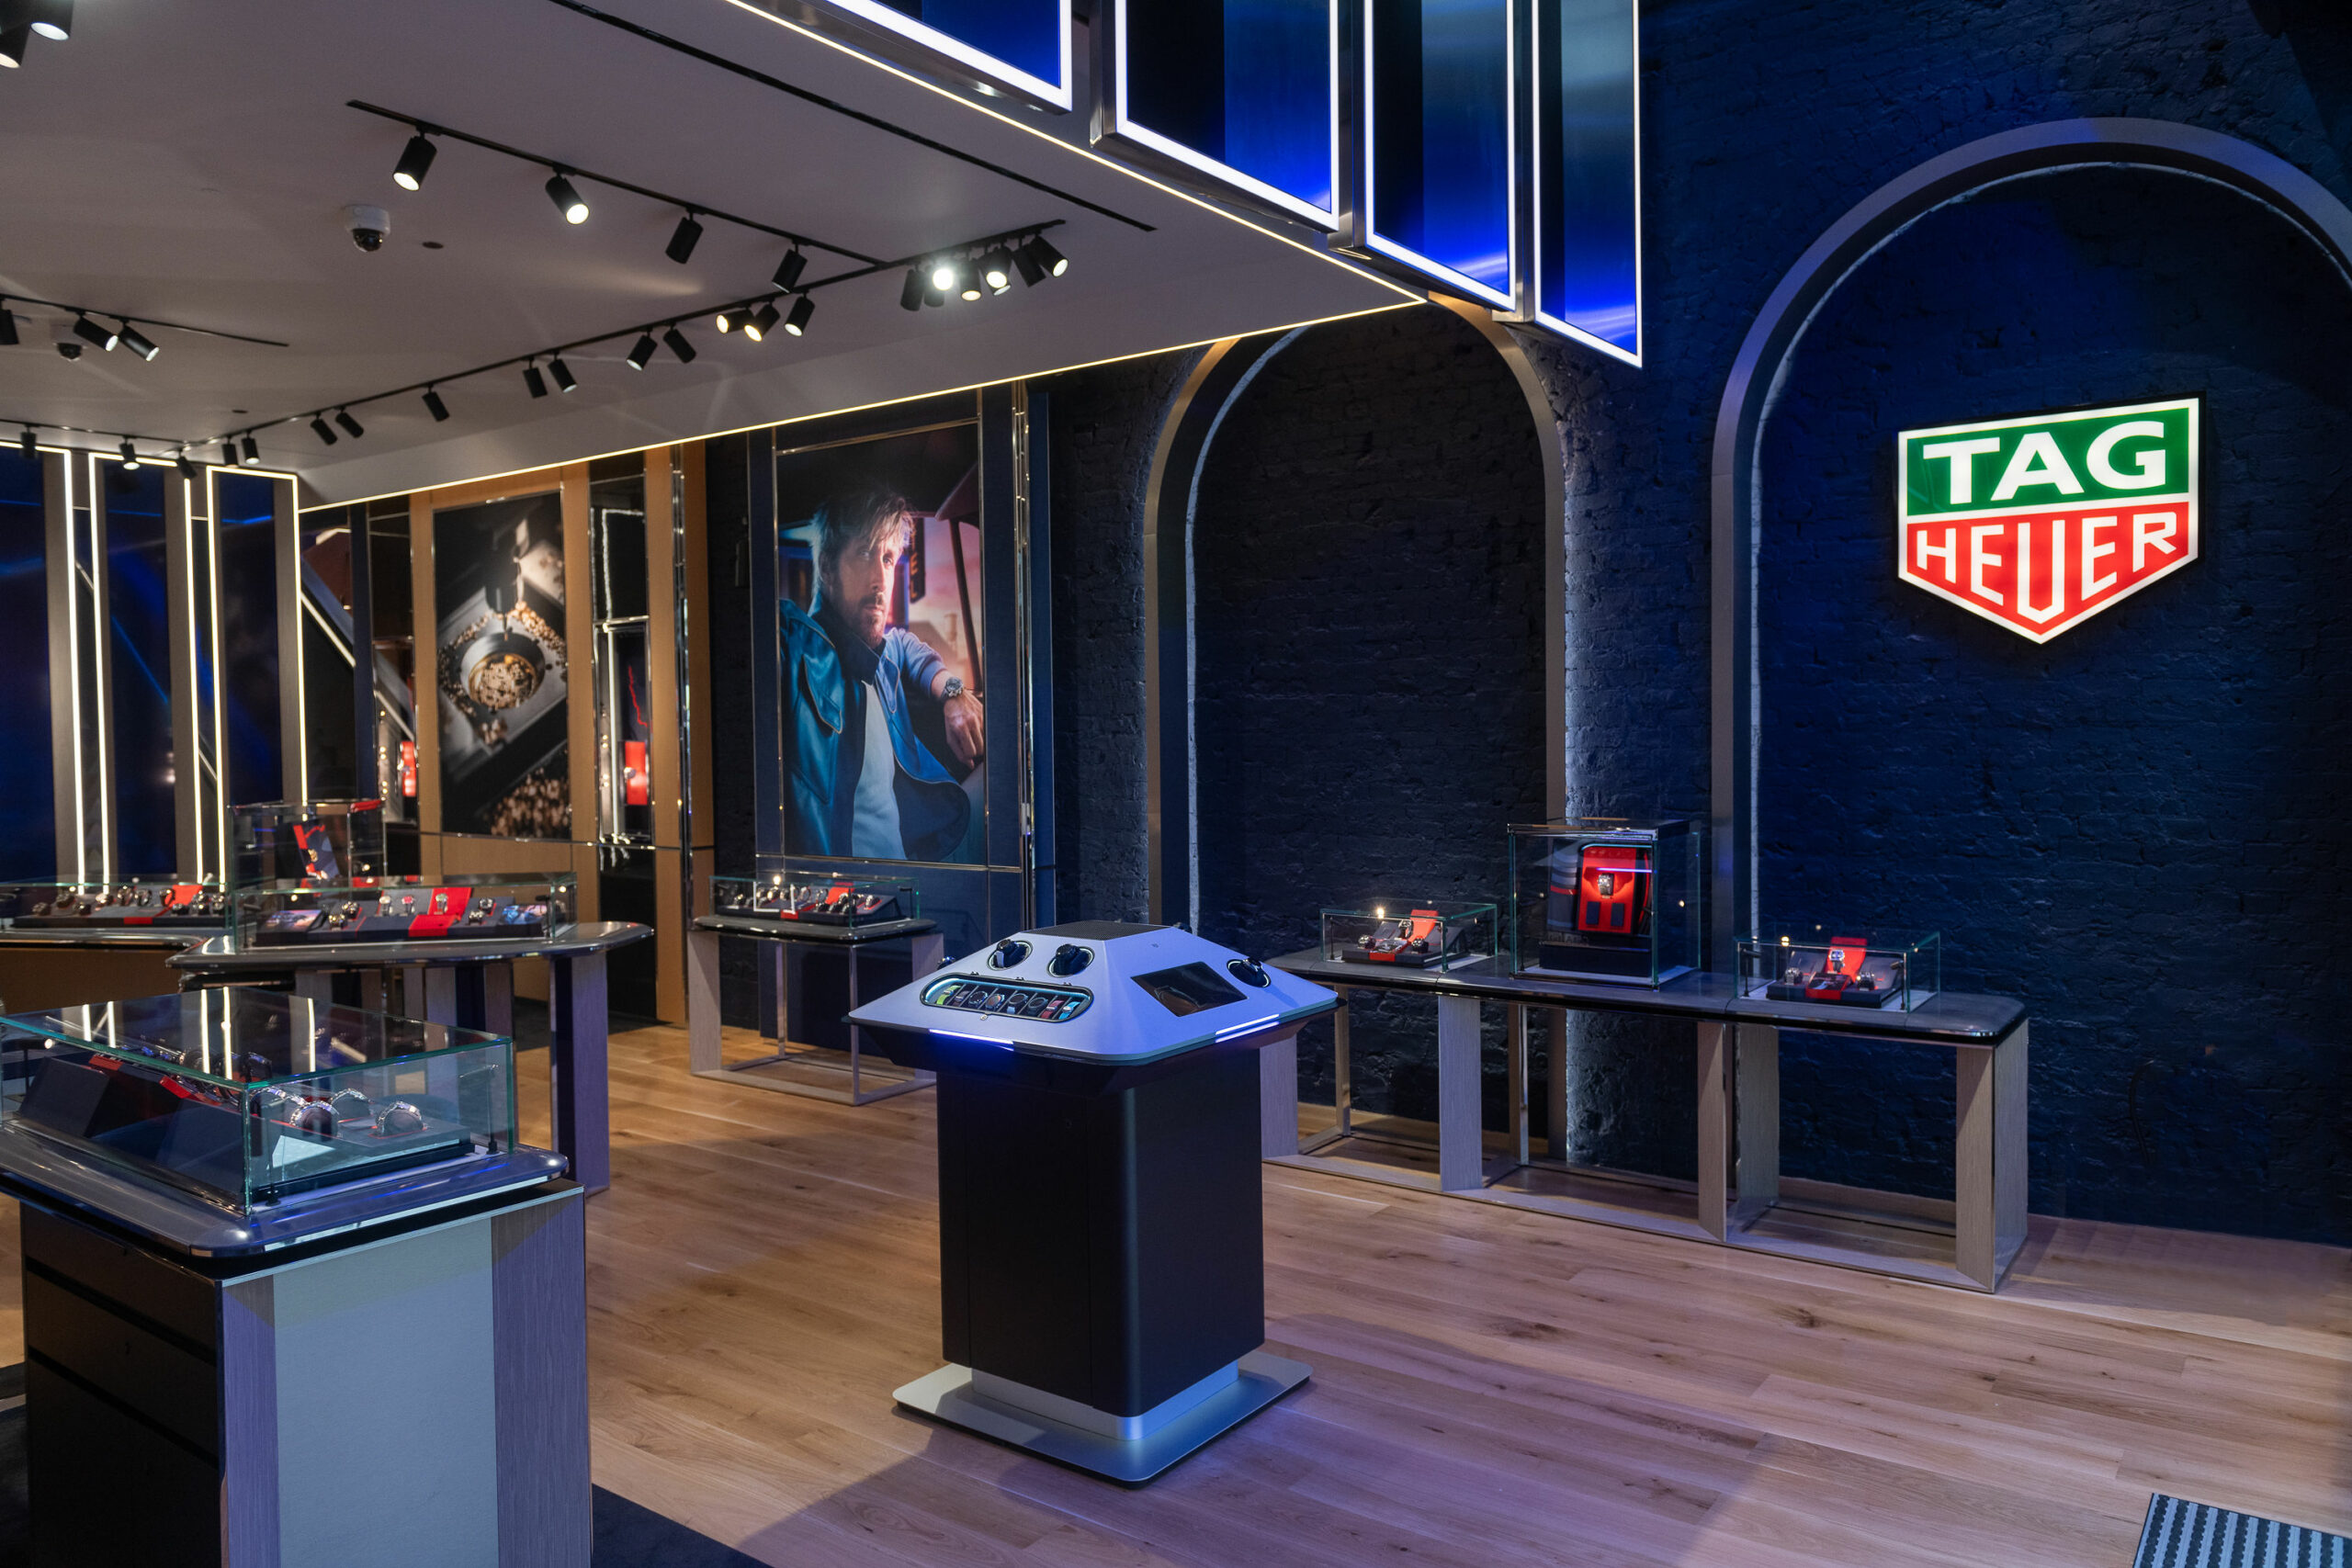 Tag Heuer has reopened its flagship boutique on London’s Oxford Street with a makeover inspired by the brand’s motor-racing history.